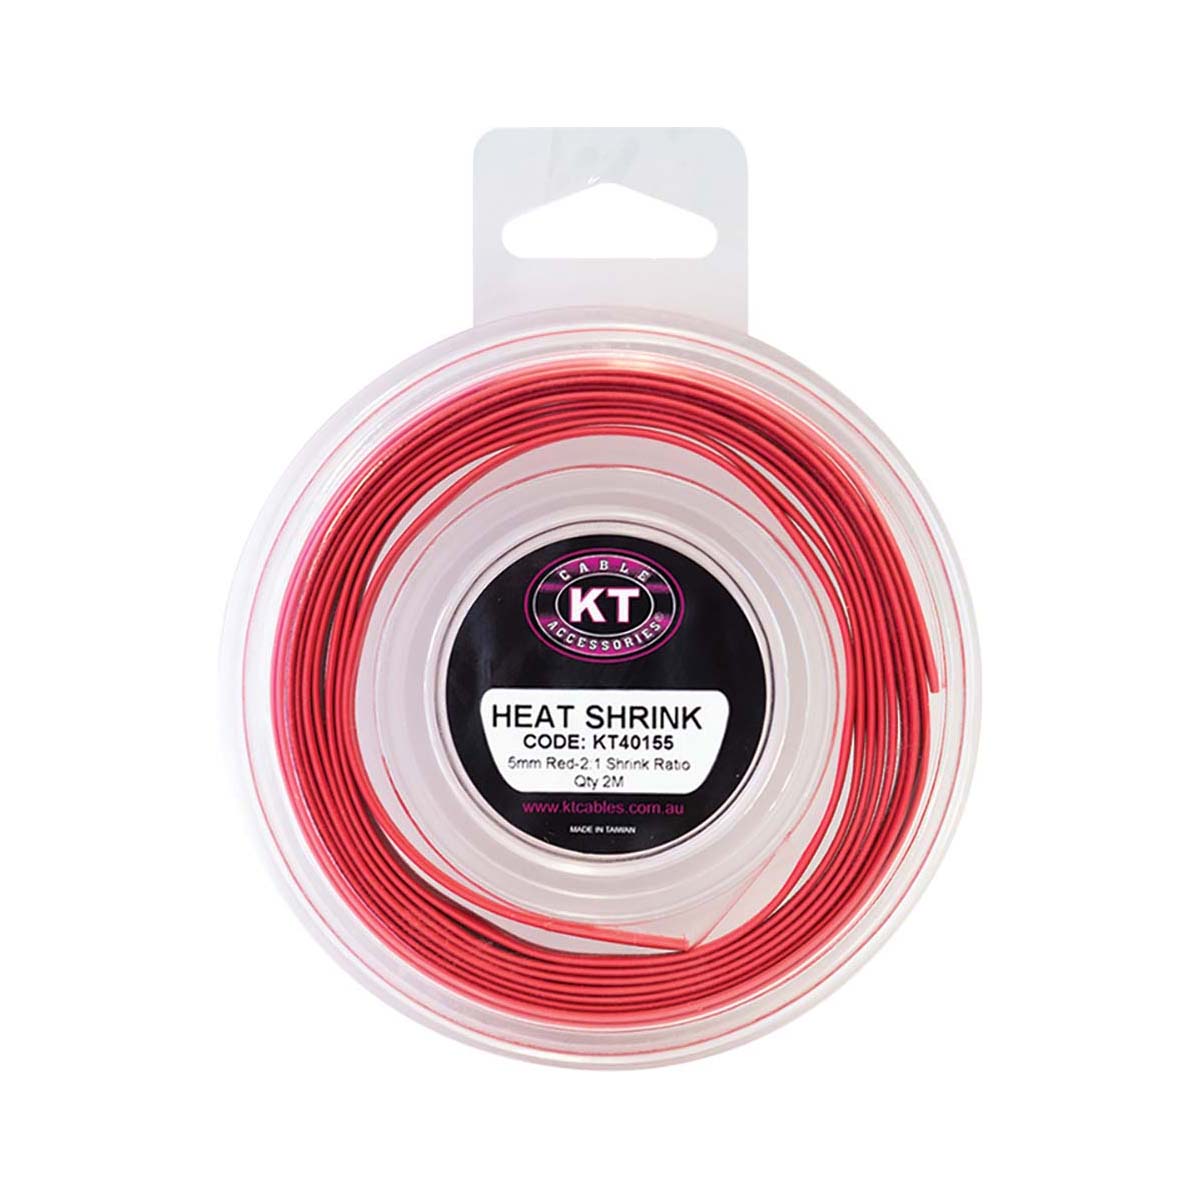 KT Cables 5mm Heat Shrink 2m Red